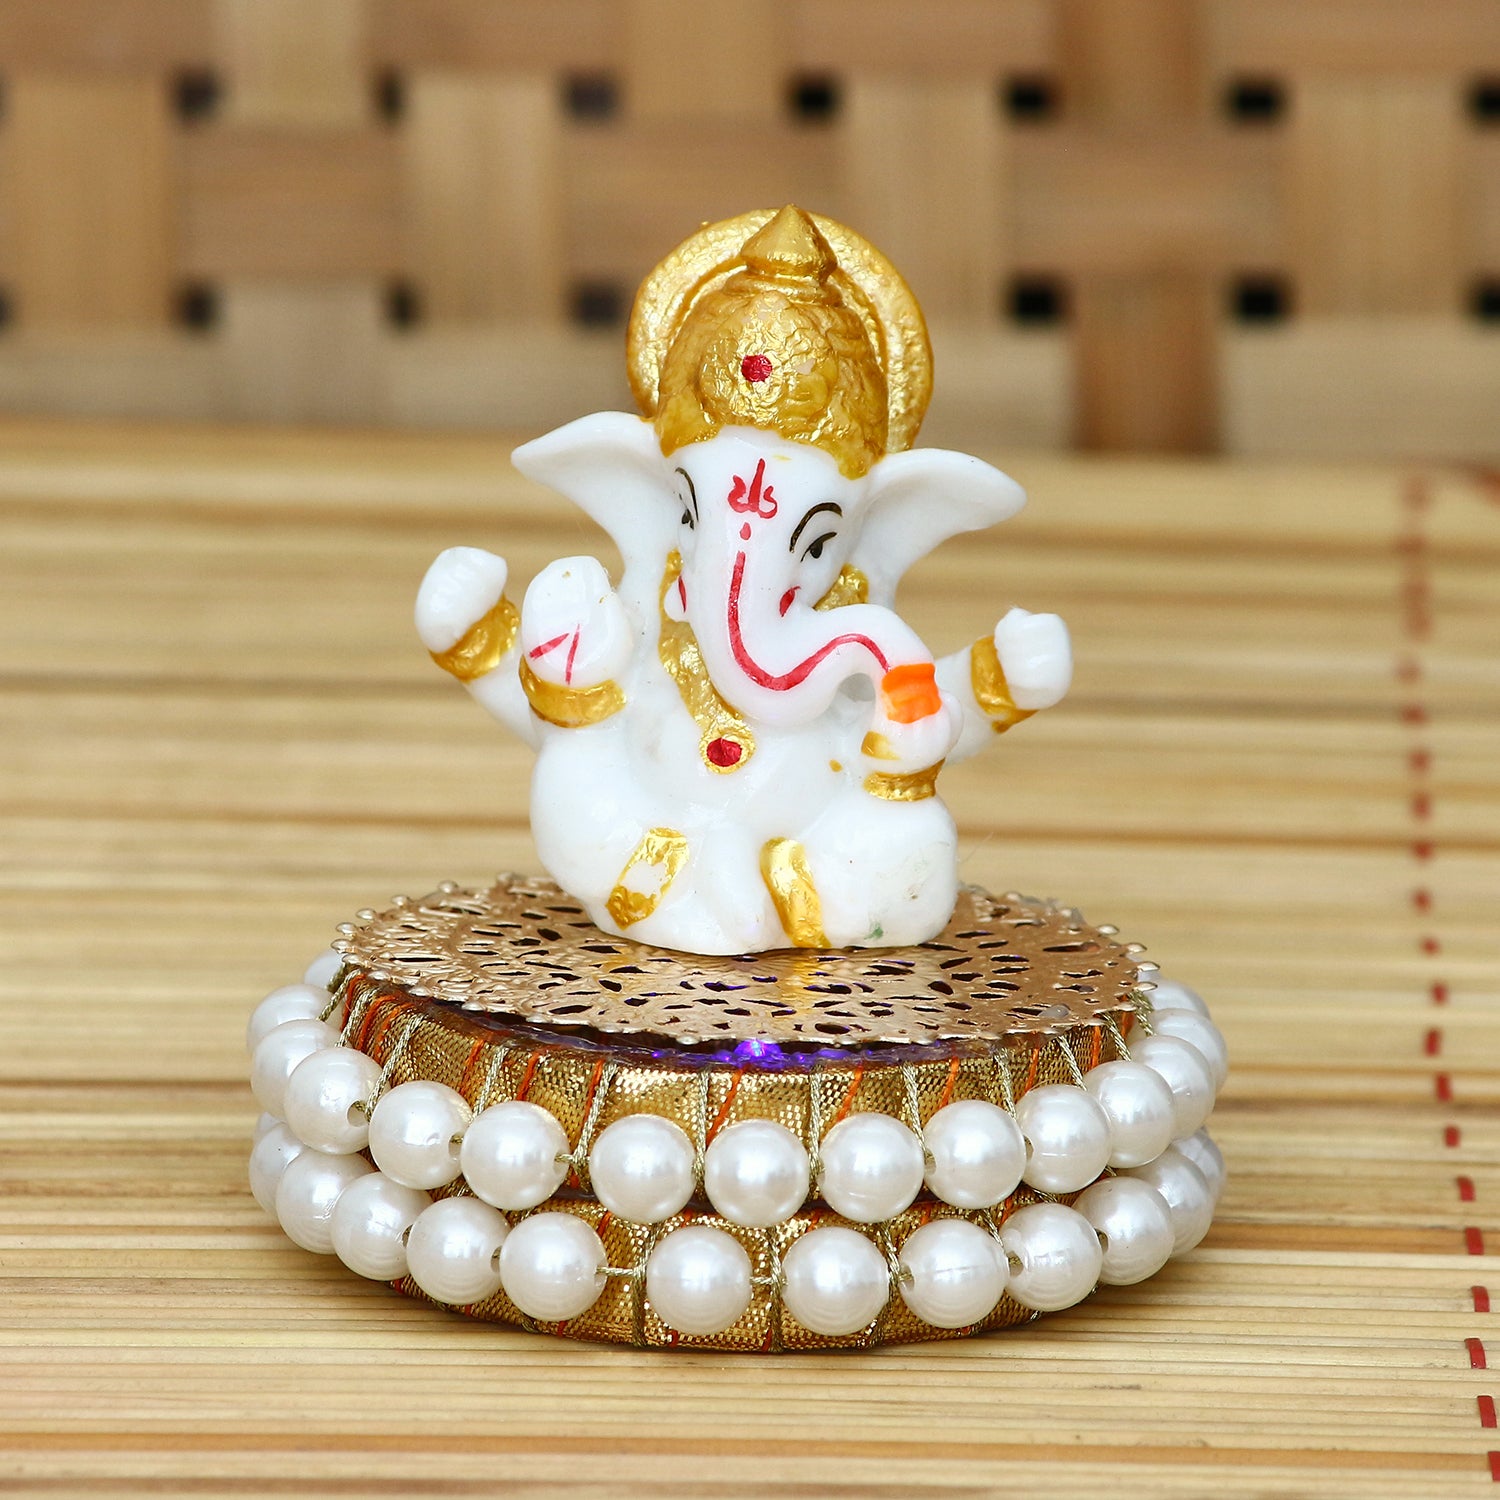 Gold and White Polyresin Lord Ganesha Idol on Decorative Handcrafted Plate for Home and Car Dashboard 3